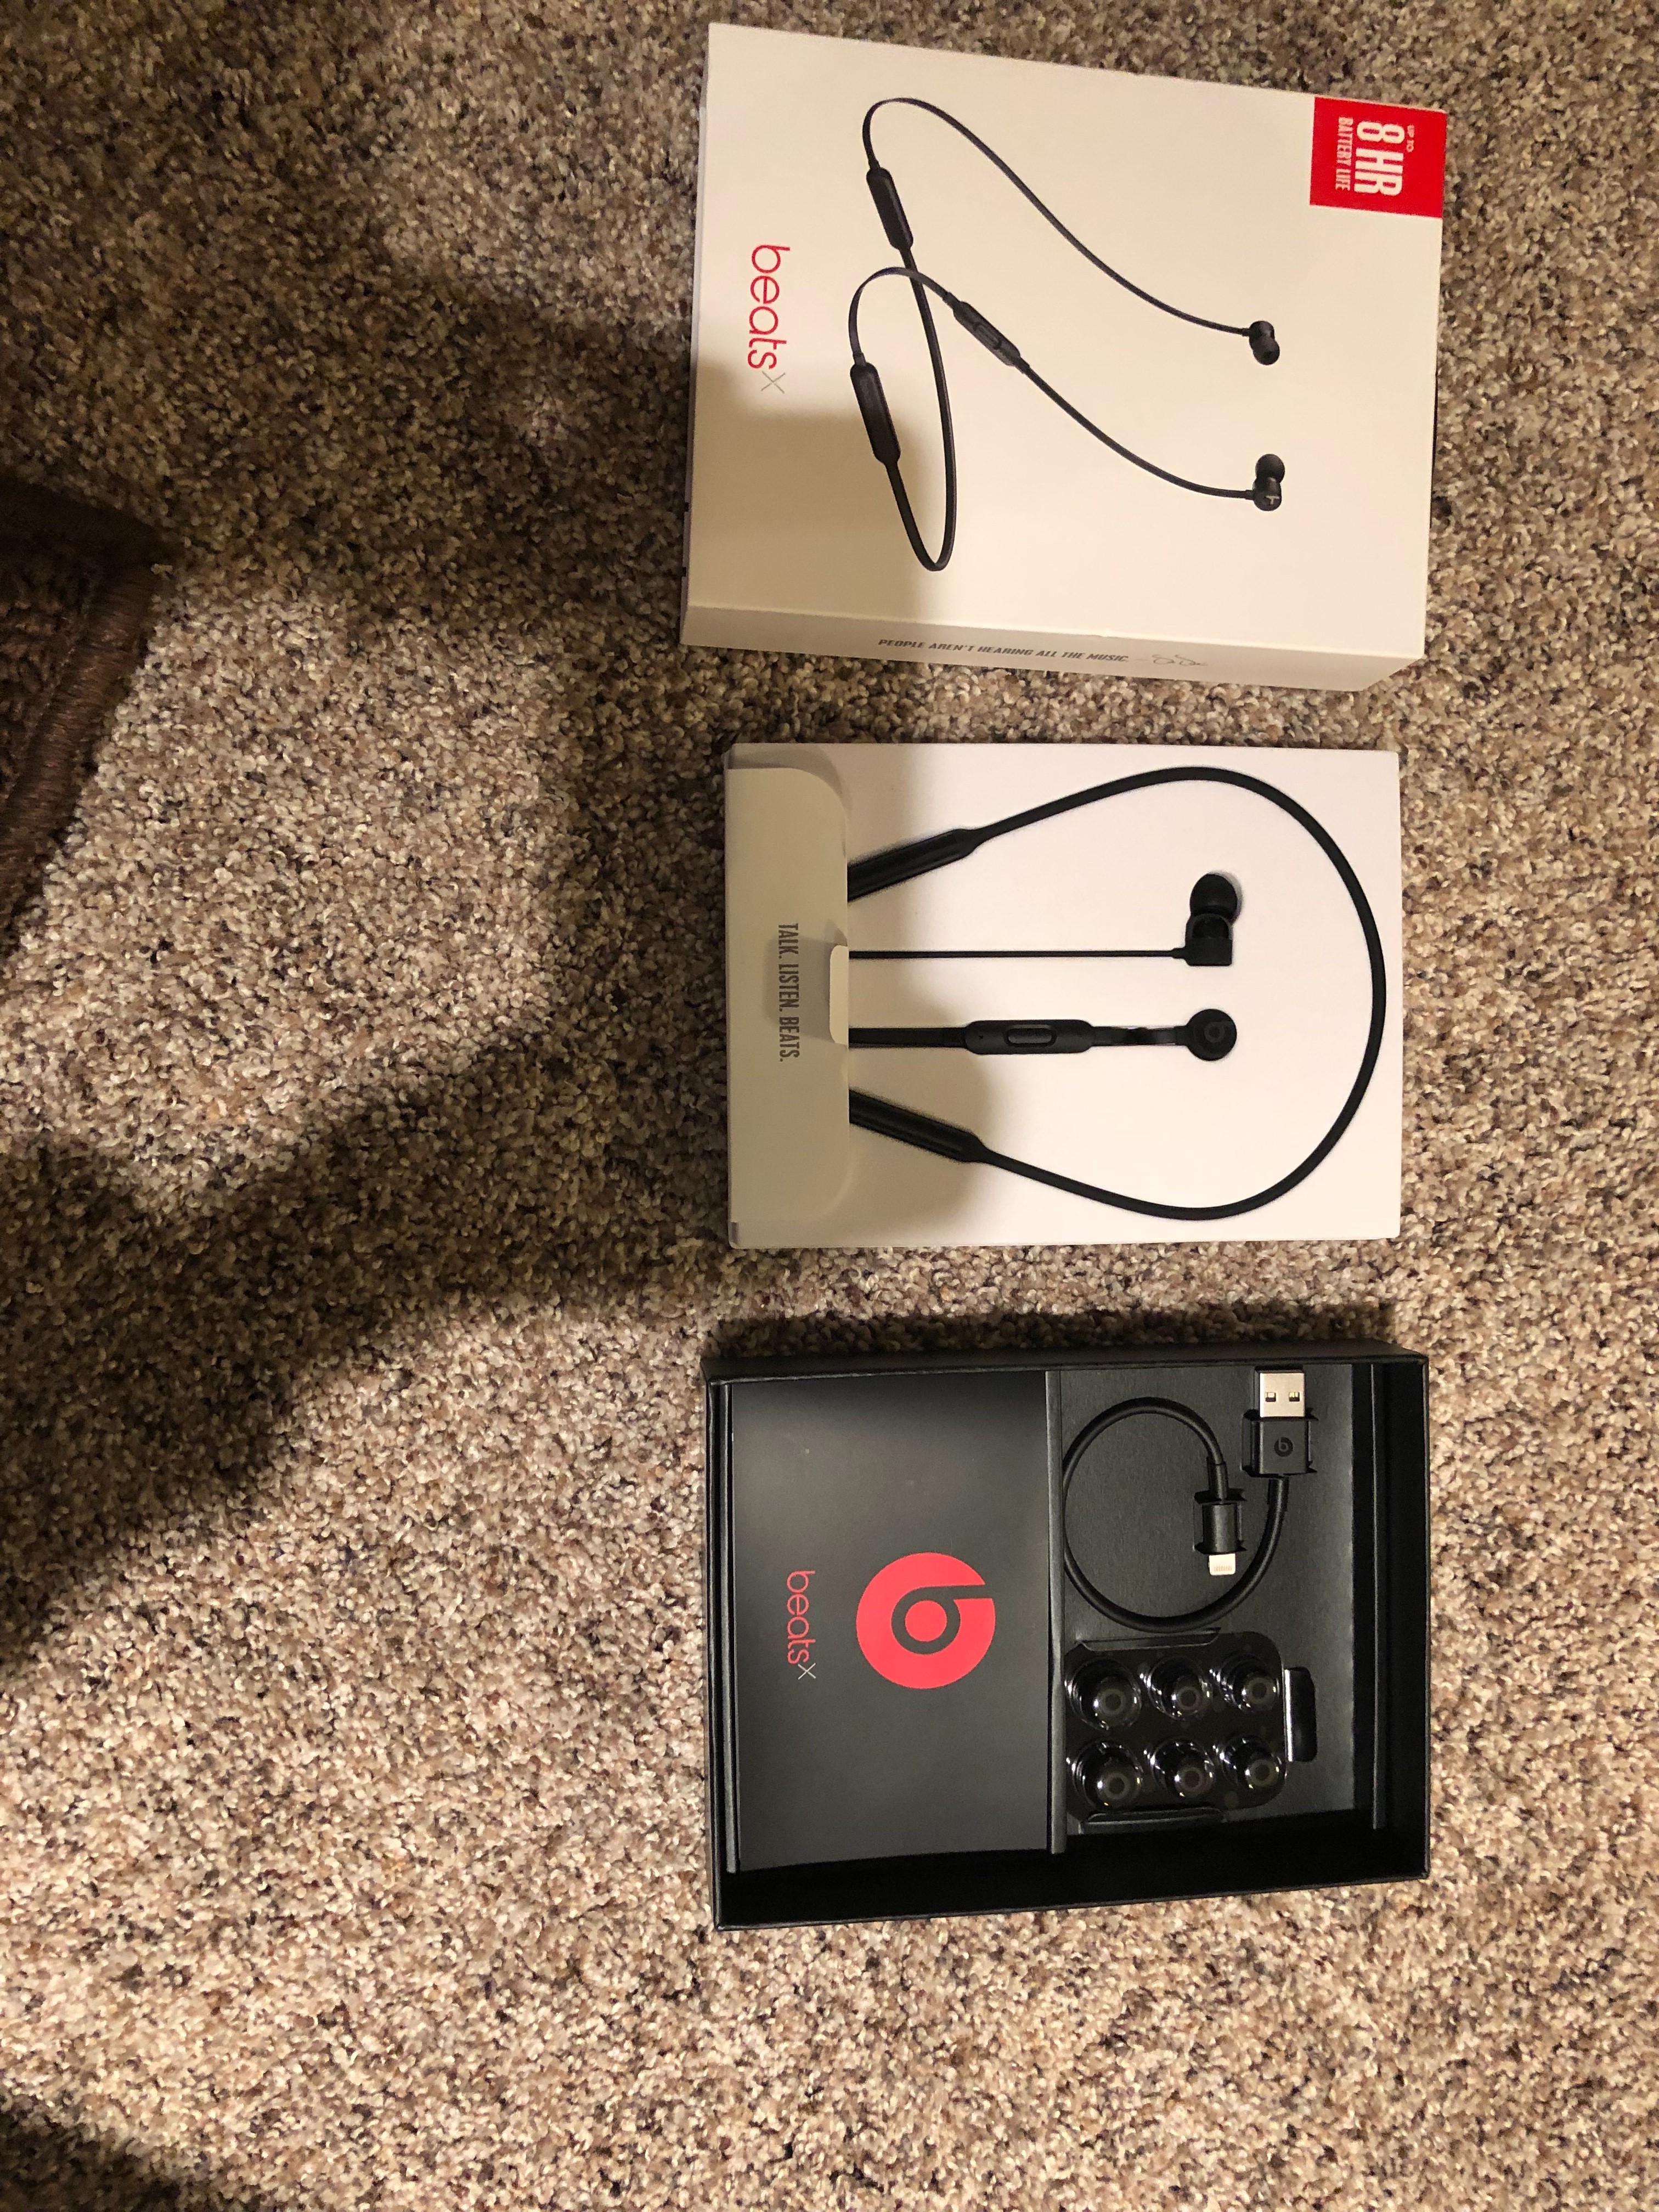 Beats x with no wing tips - Apple Community